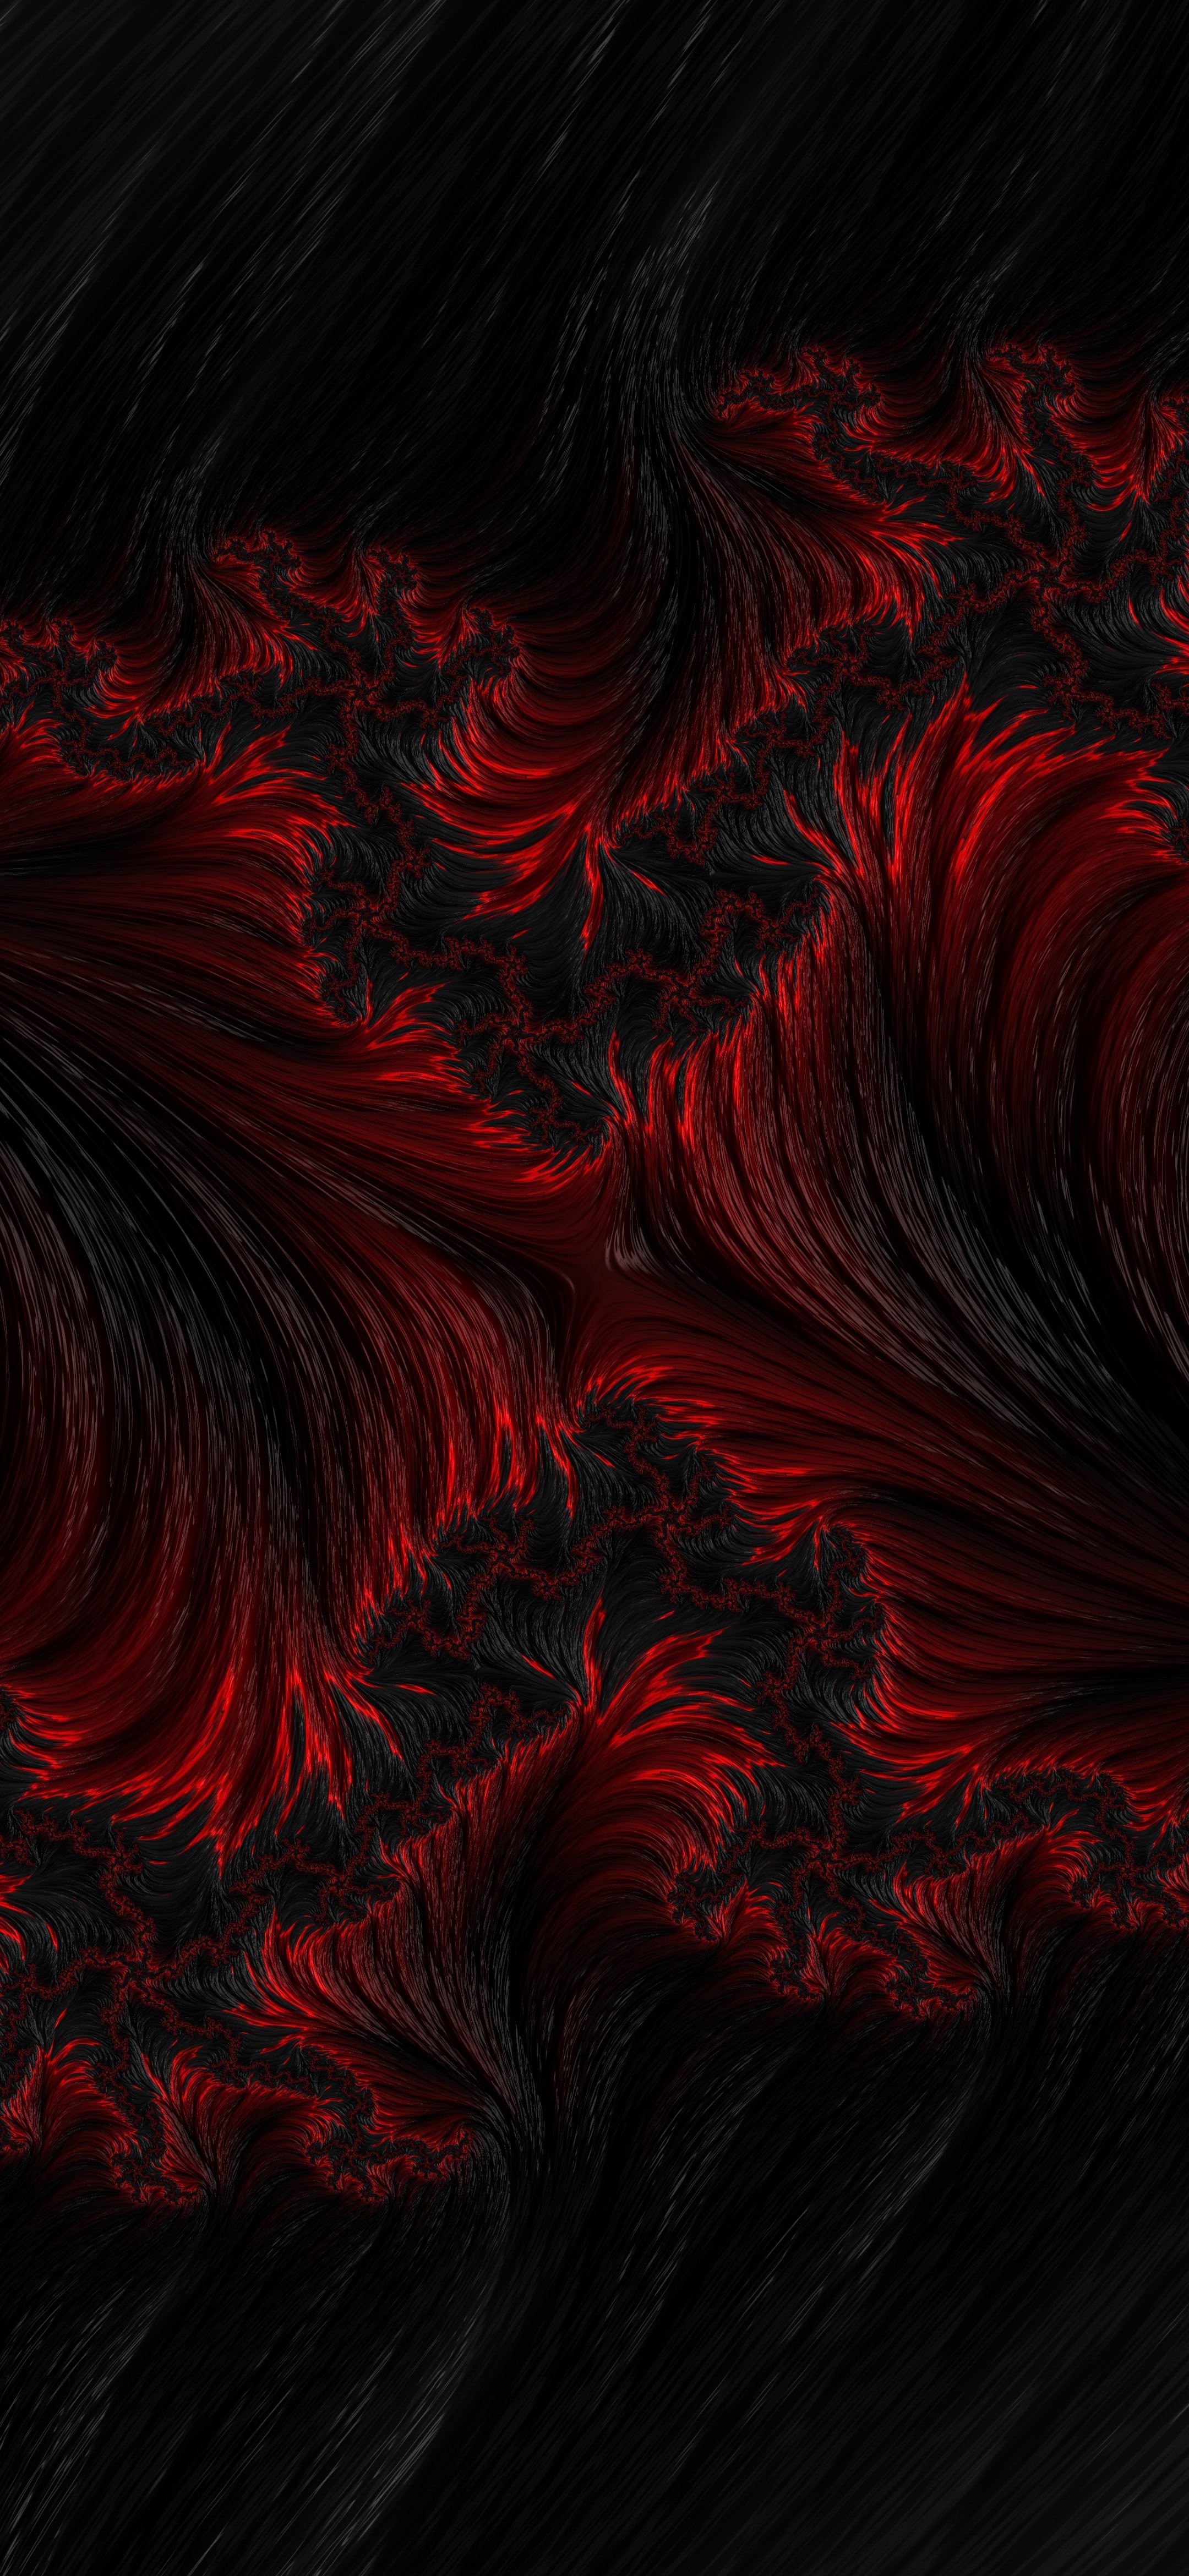 wavy, black, abstract, red, fractal 4K Ultra